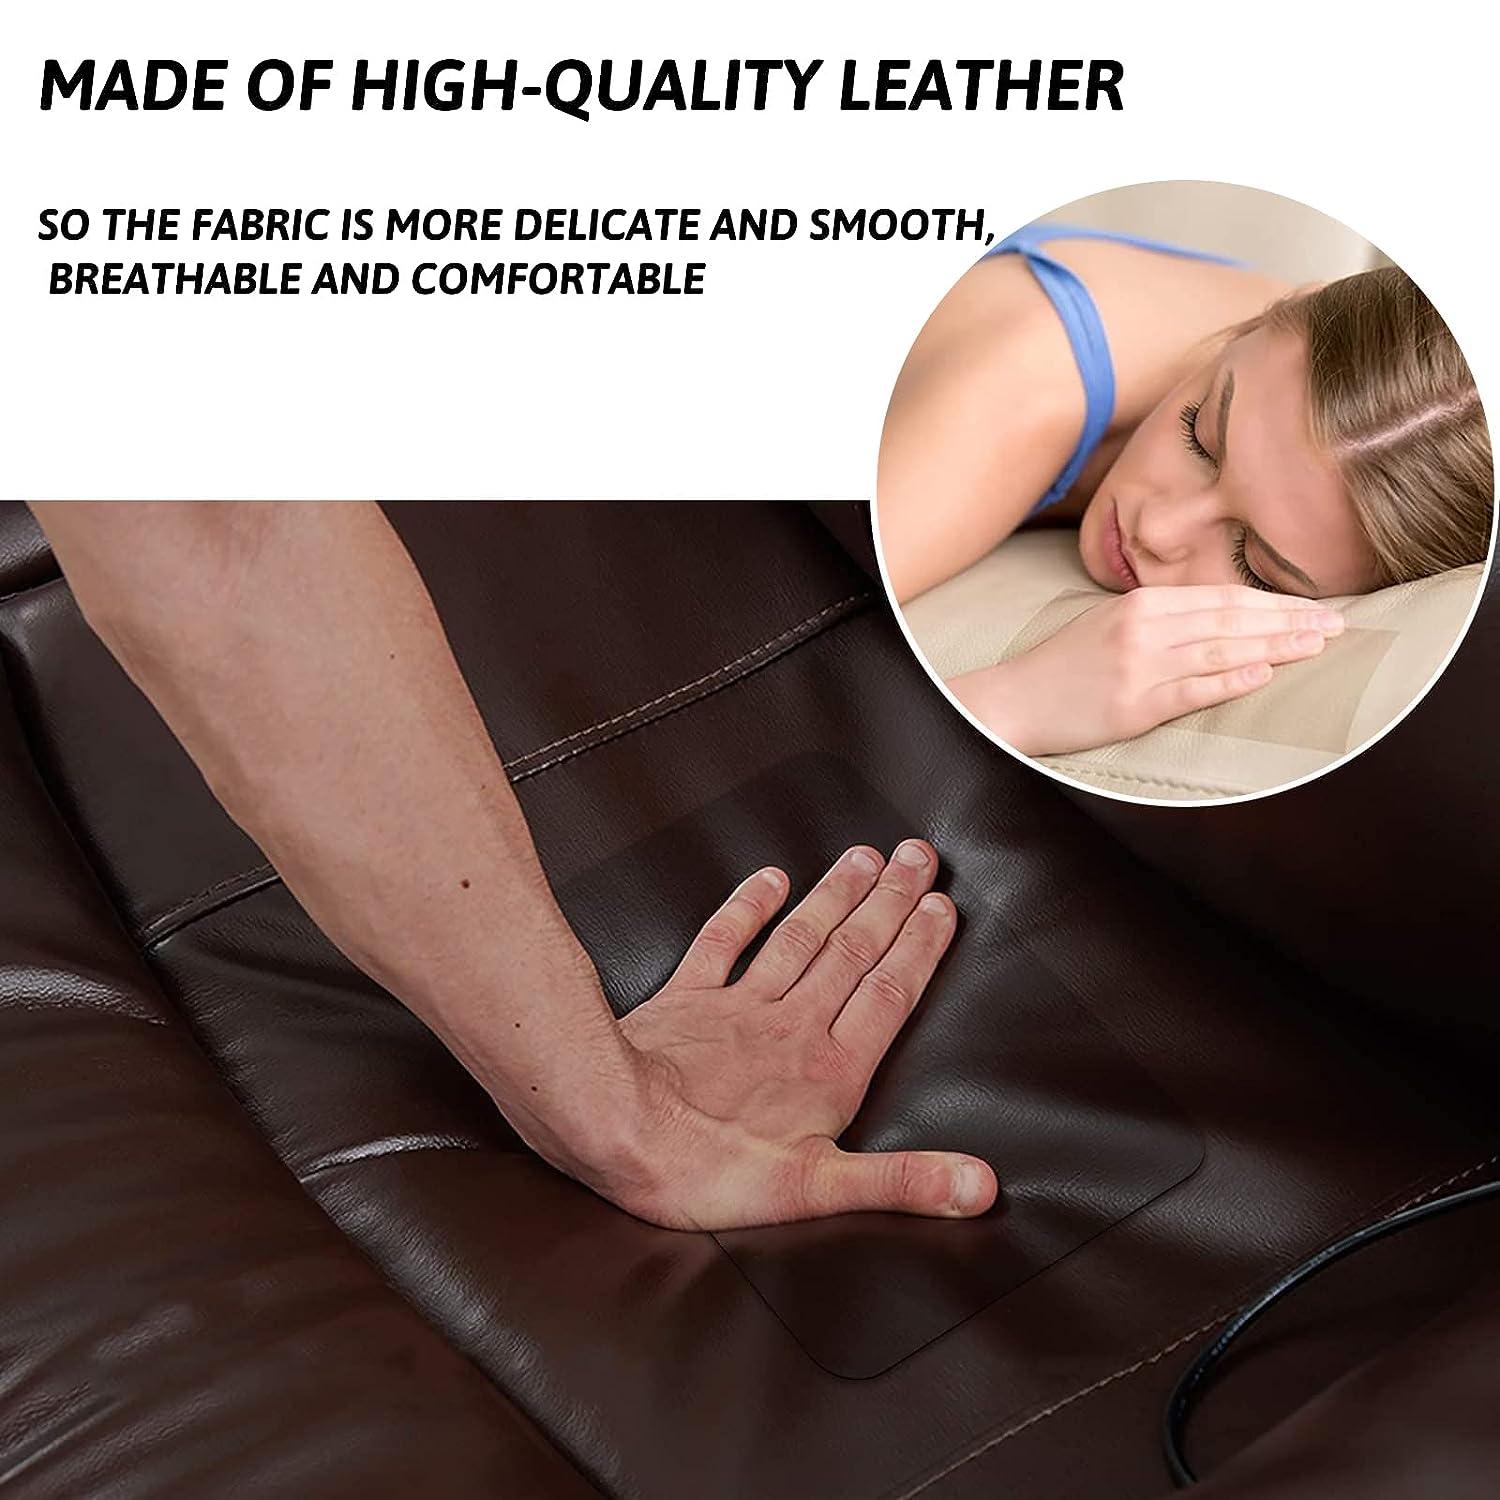 Leather Repair Patch Self-Adhesive Couch Patch 8 11 inch Strong Adhesion  Adhesive Multiple Colors Leather Repair Kit for Couch Car Seats. Bonded  Leather Repair (8 11 inch / 2 pcs White) 8 11 inch / 2 pcs White